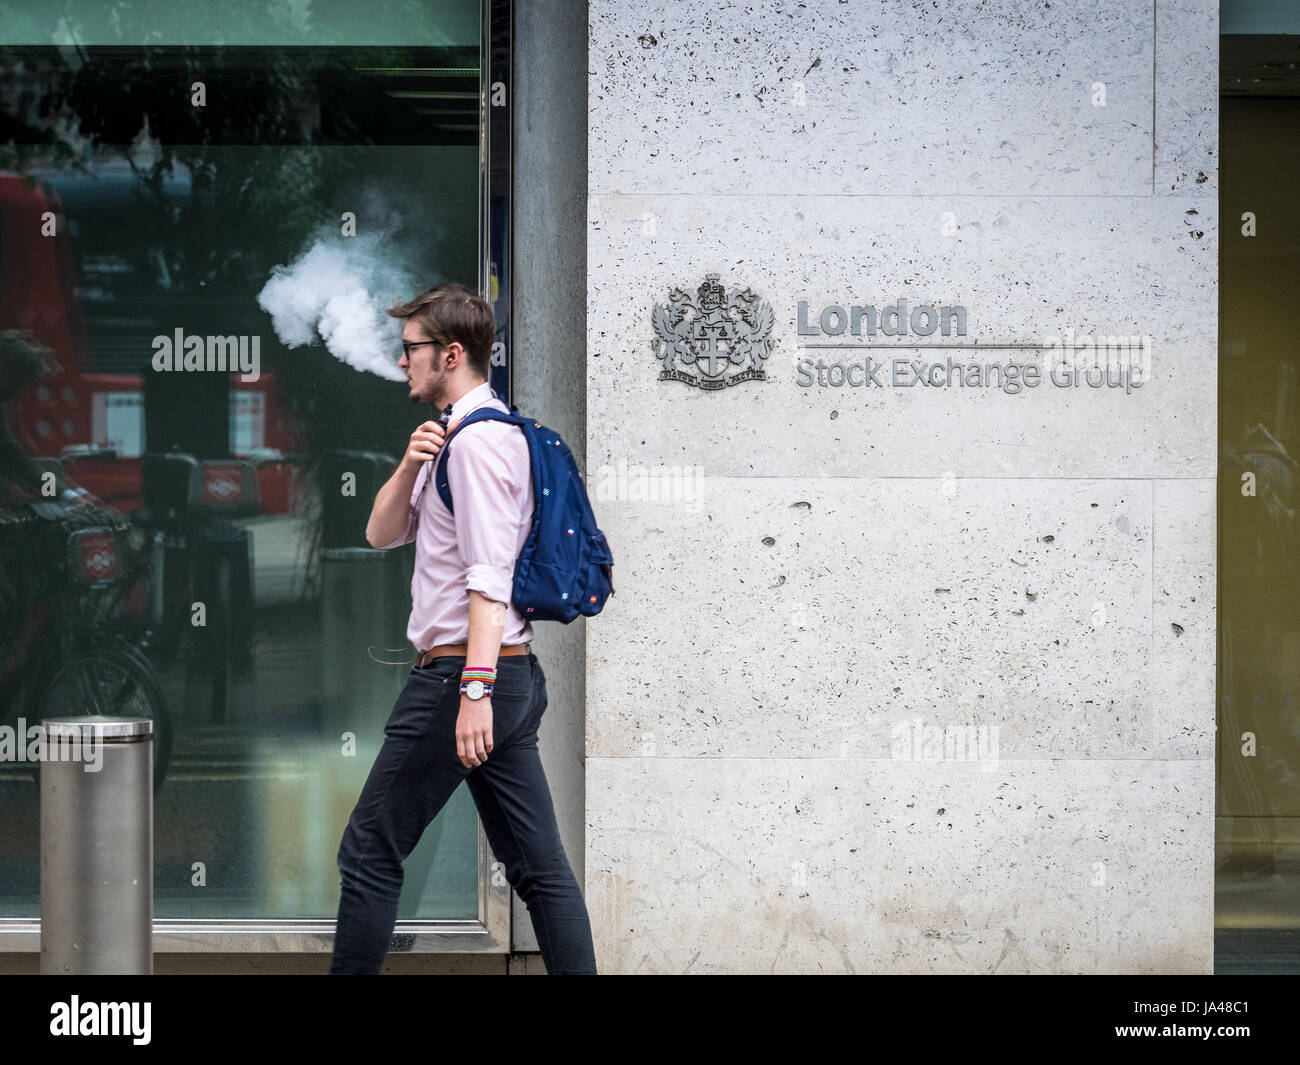 London Stock Exchange LSE - A city worker exhales vapour while passing the London Stock Exchange offices in the City of London, UK Stock Photo